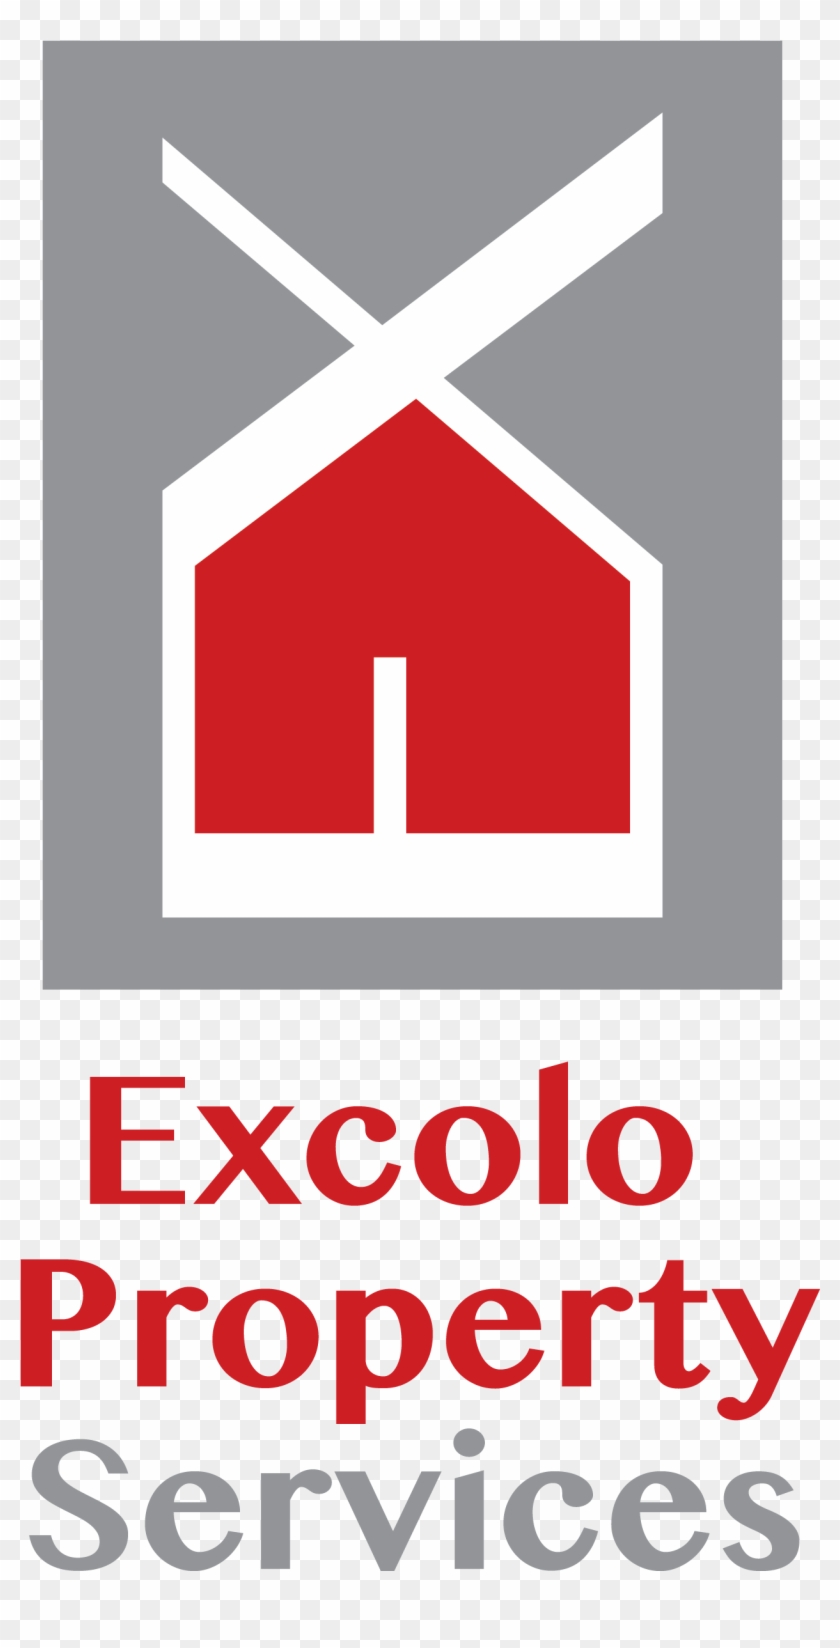 Excolo Property Services Needed A Logo And Business - Oklahoma Department Of Human Services #776524